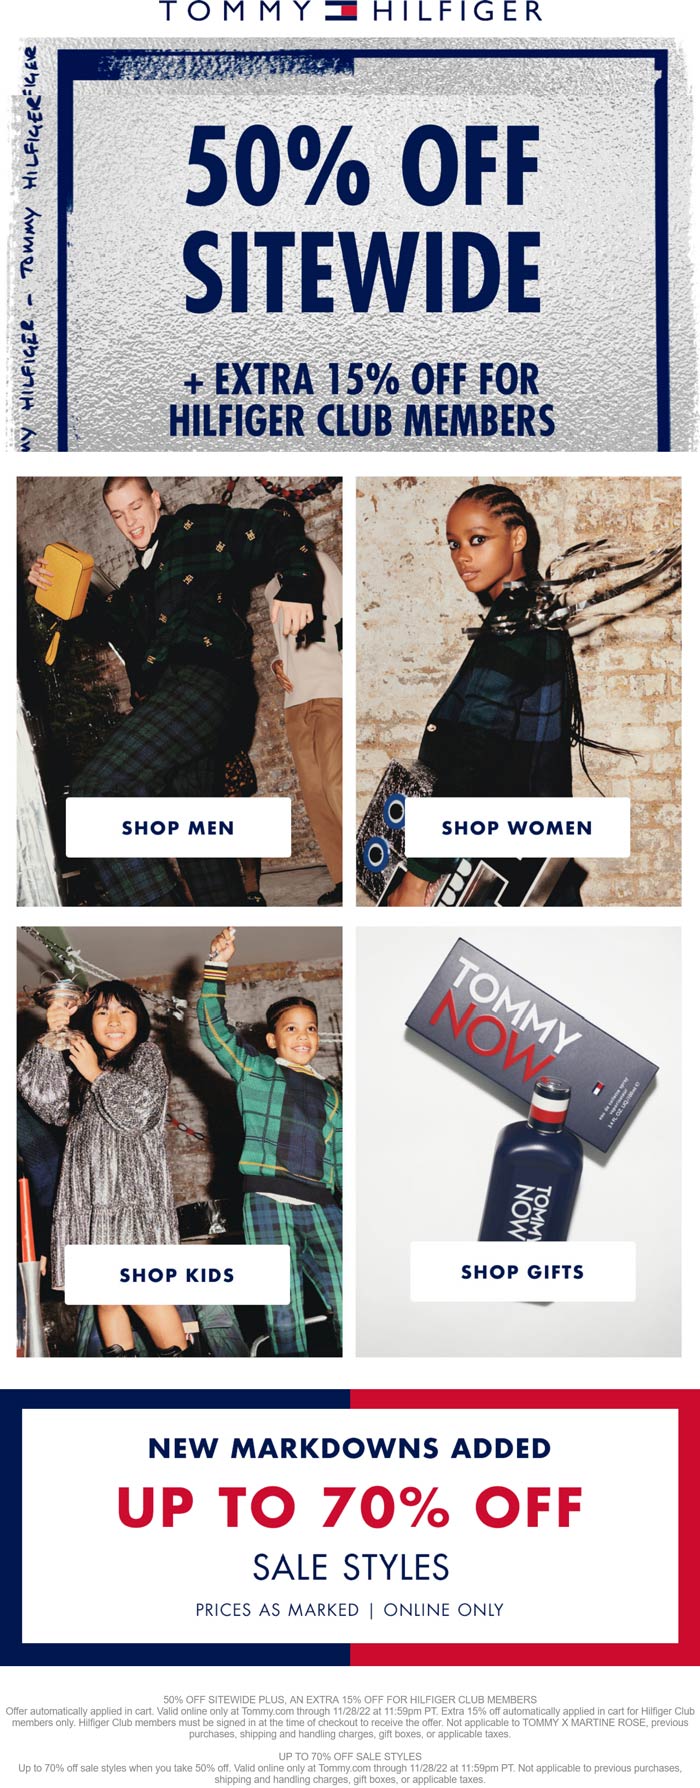 Tommy Hilfiger coupons & promo code for [January 2023]